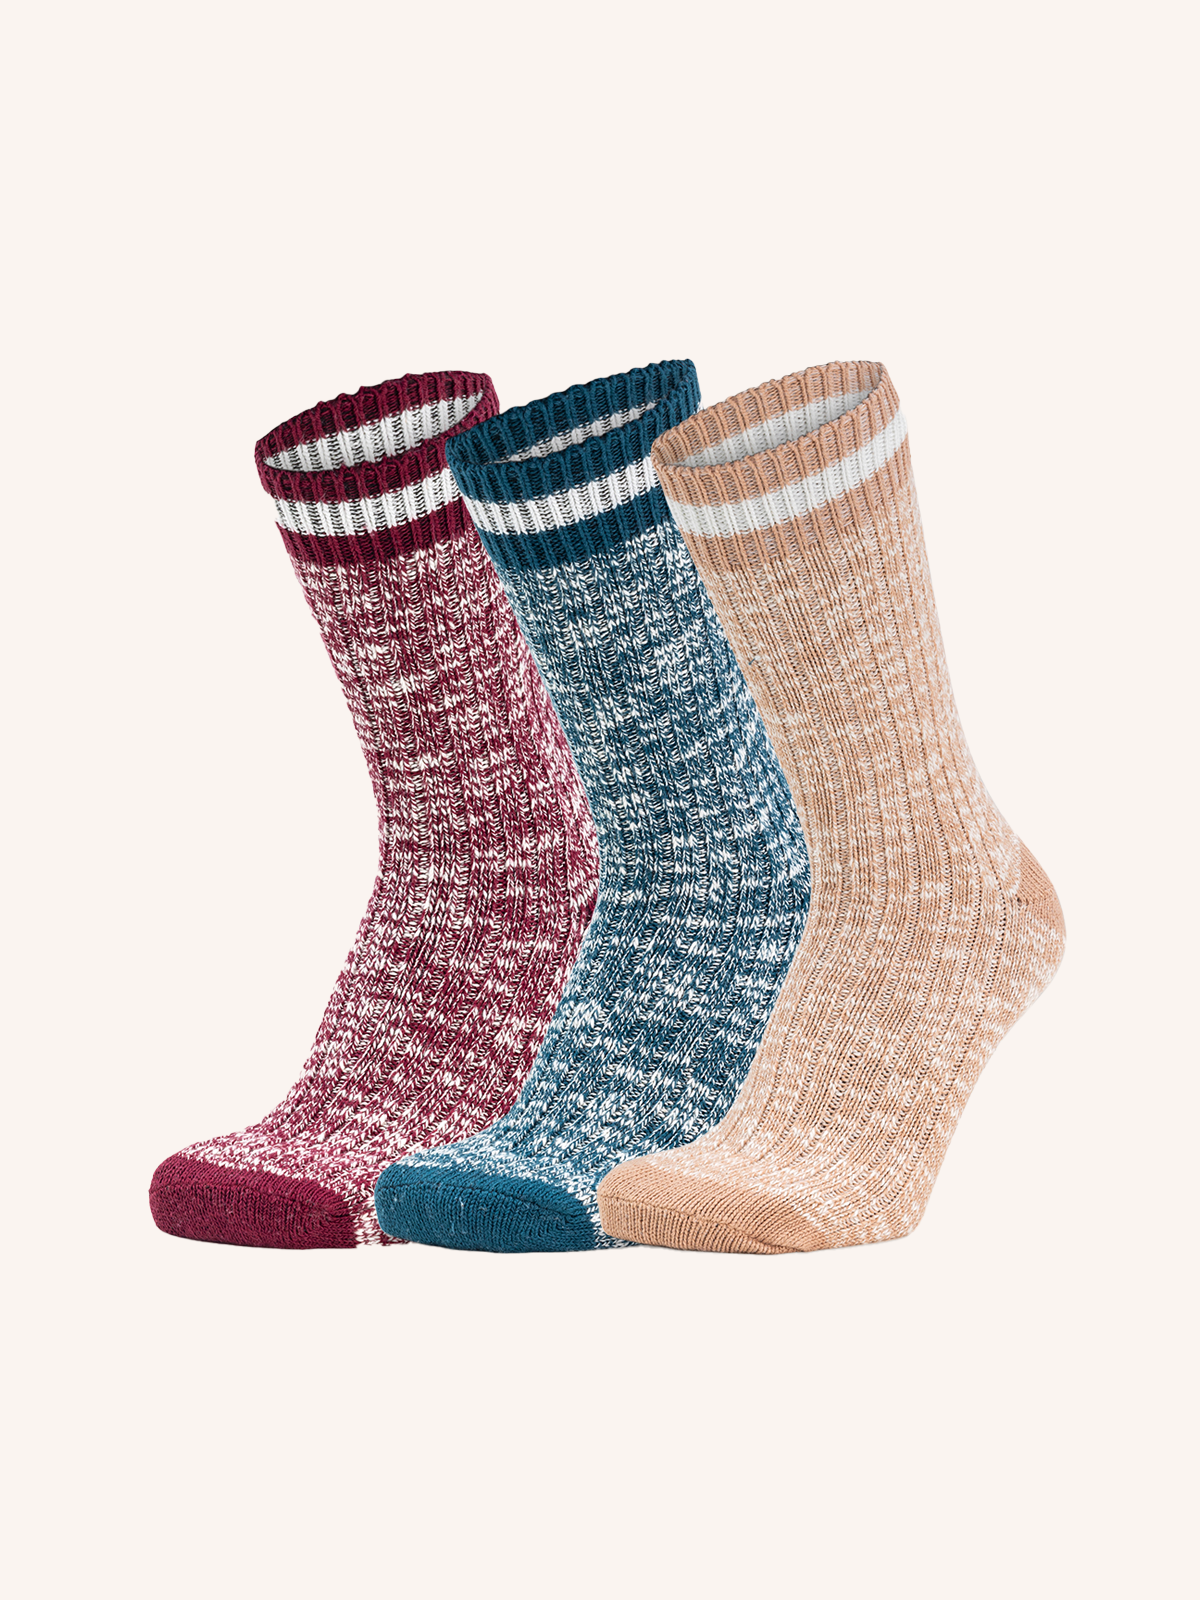 Short Cotton Socks for Women | Plain Color | Pack of 3 pairs | Twins